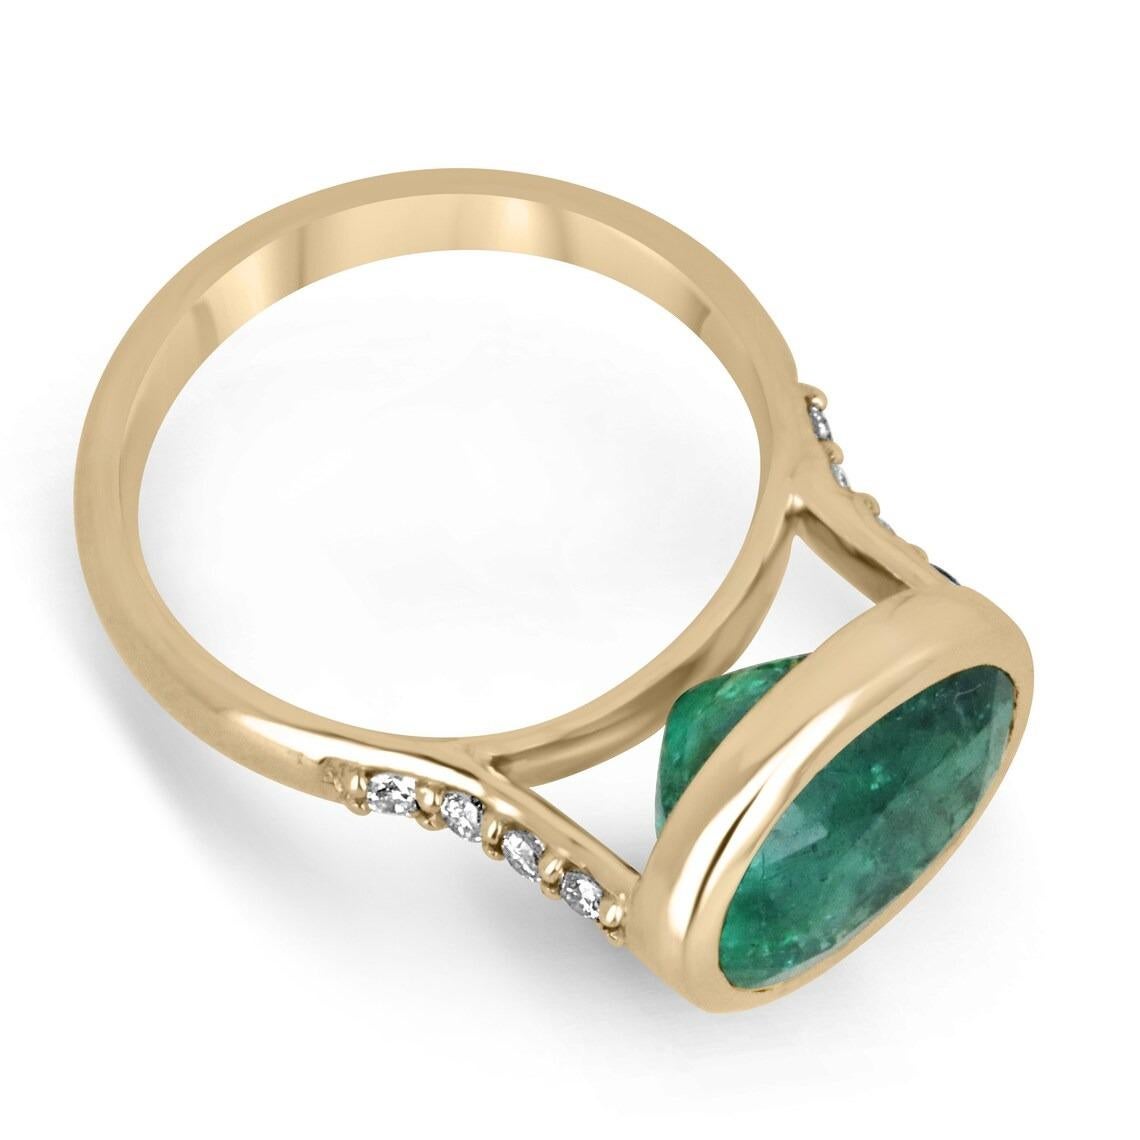 A gorgeous emerald and diamond ring. This beauty showcases a large oval cut emerald weighing over five carats, with remarkable characteristics such as its dark alpine green color, very good luster, and clarity. The center stone is skillfully bezel